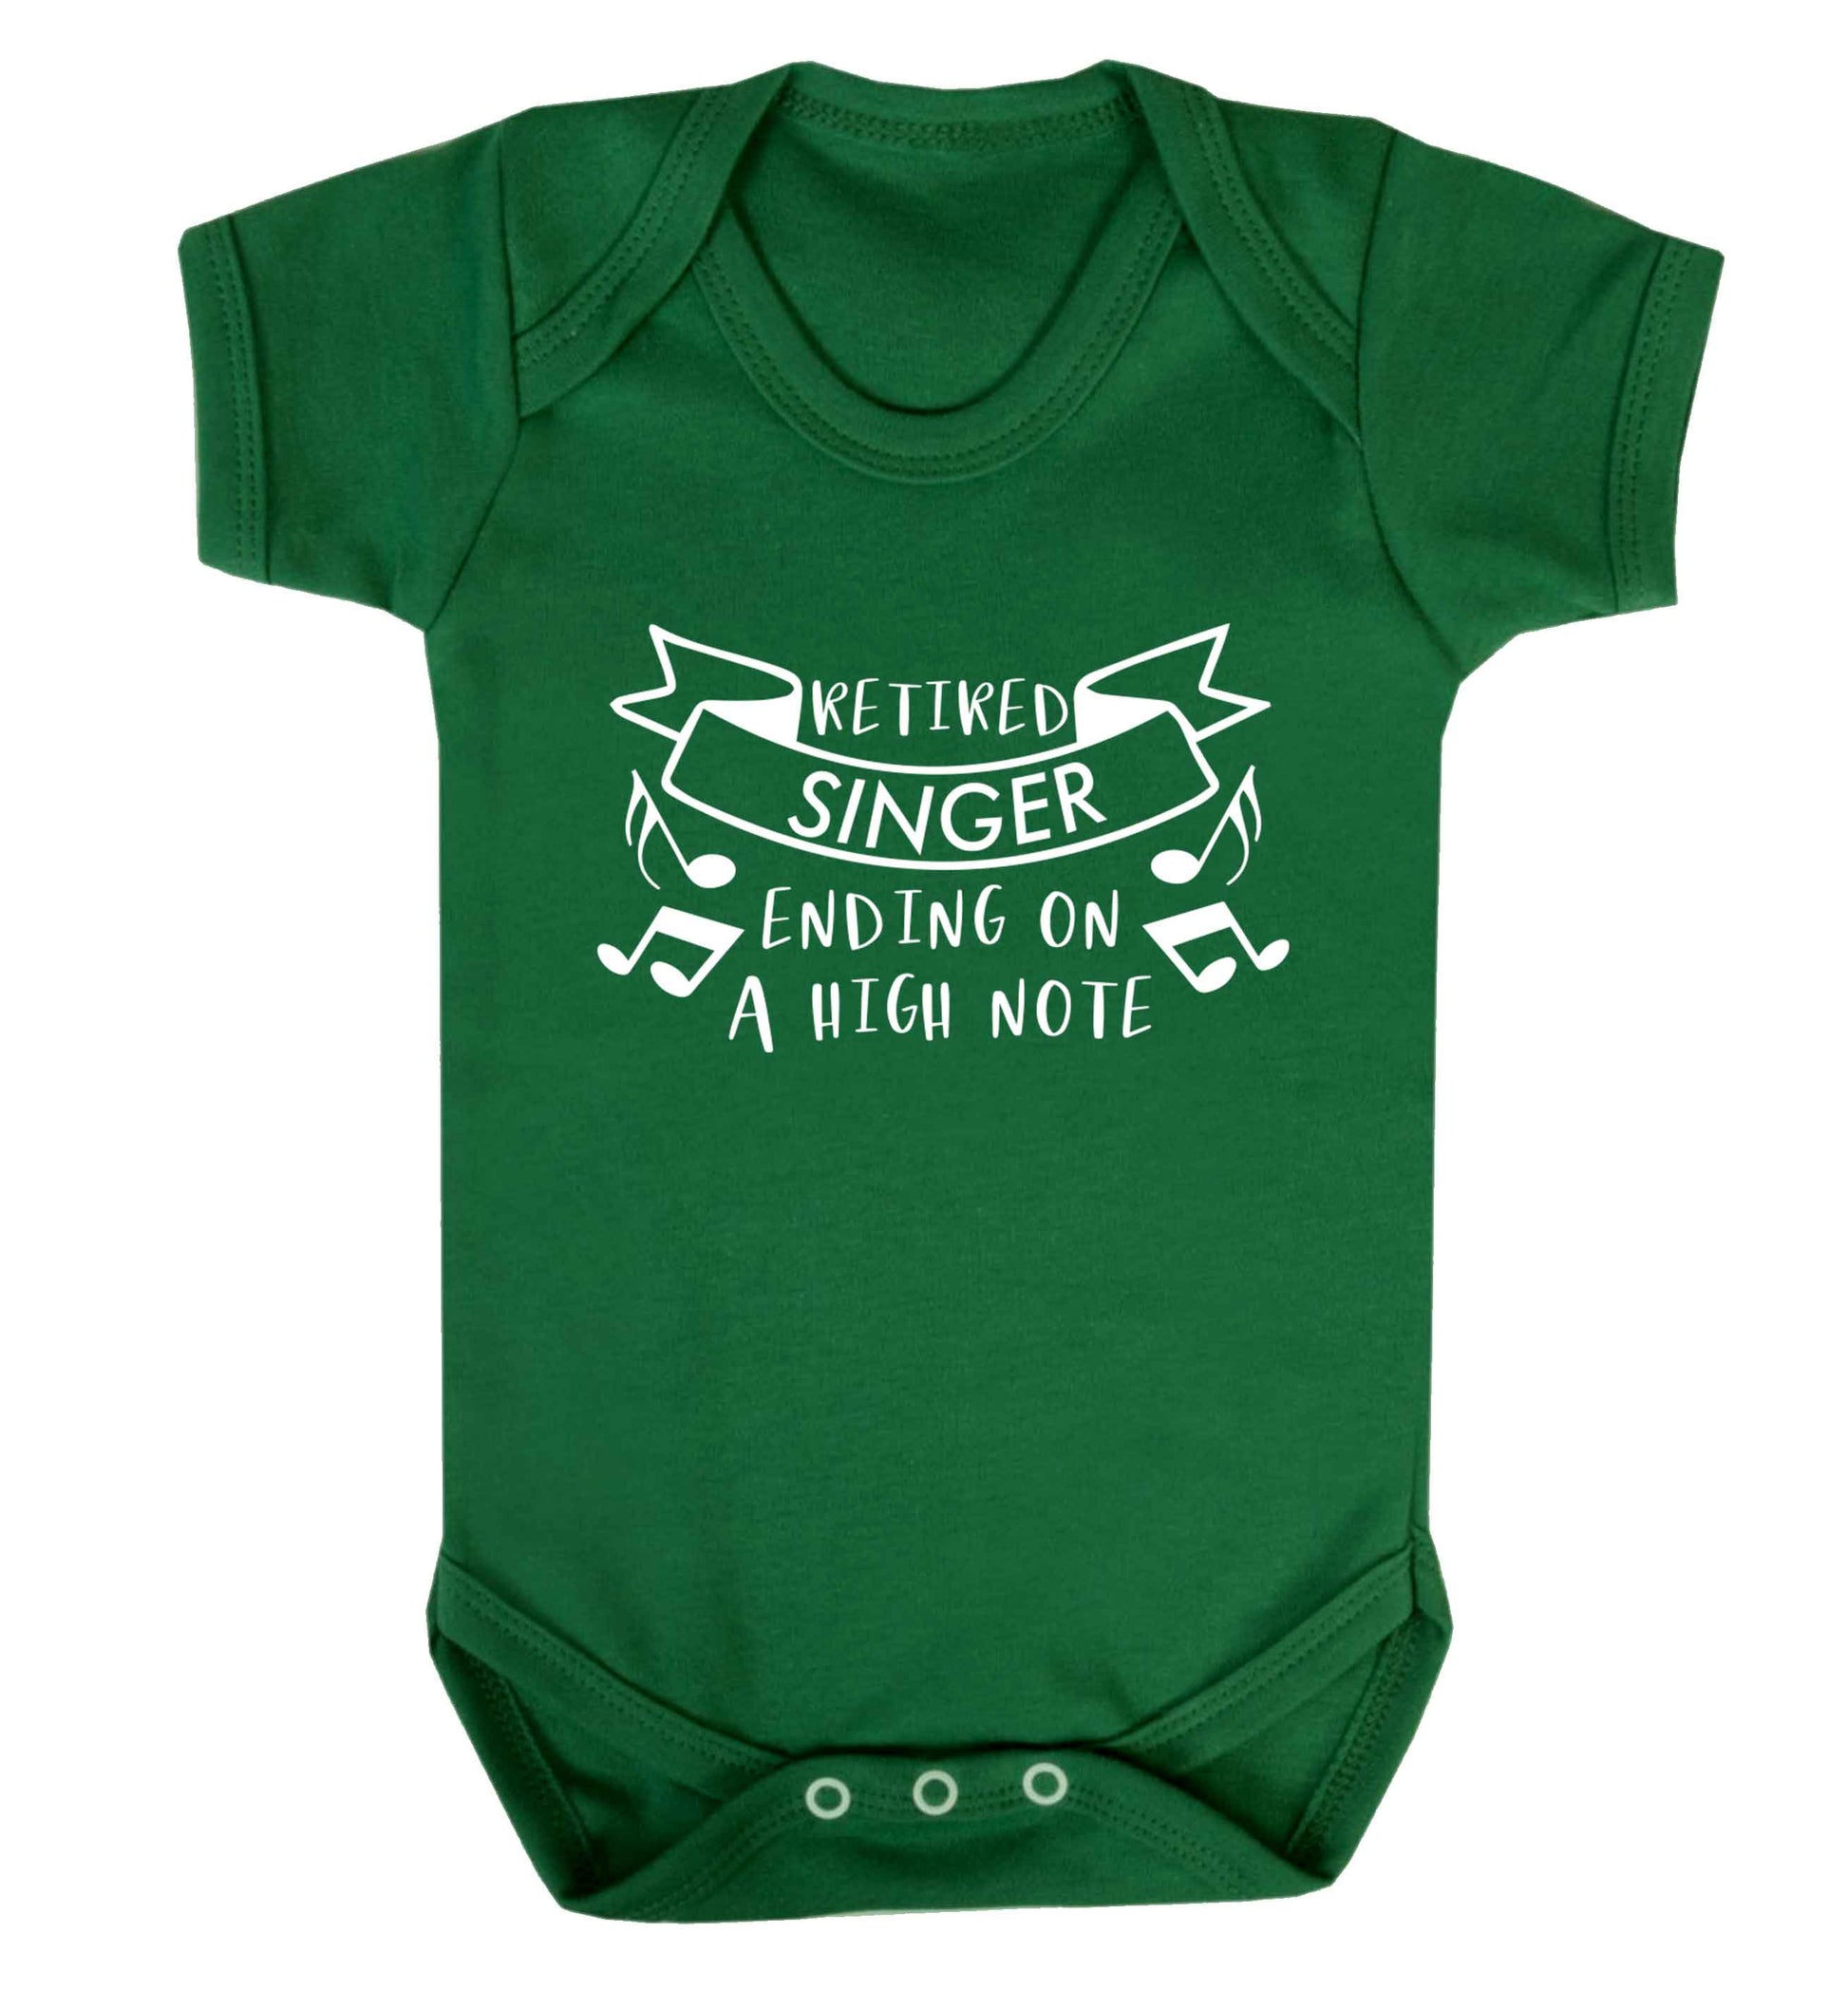 Retired singer ending on a high note Baby Vest green 18-24 months